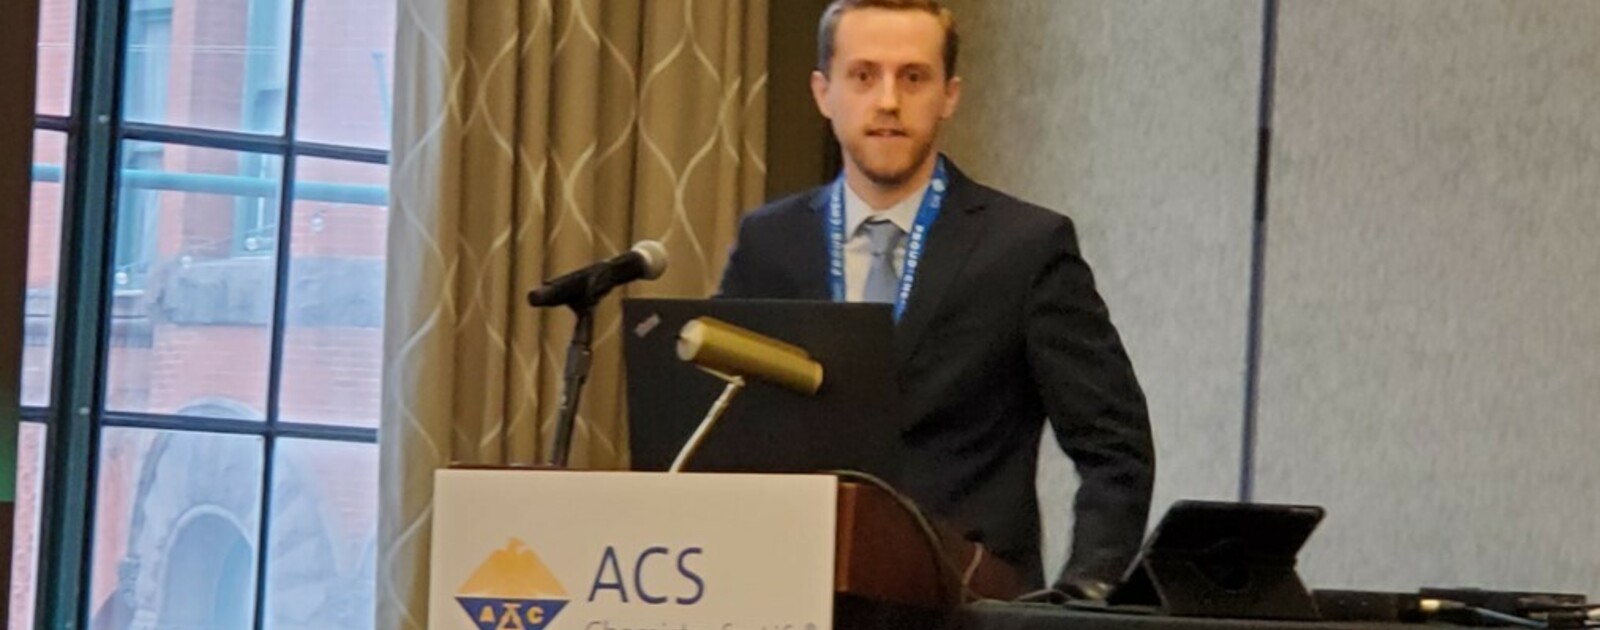 Walker Tuff presents his research at ACS Spring meeting in Indianapolis